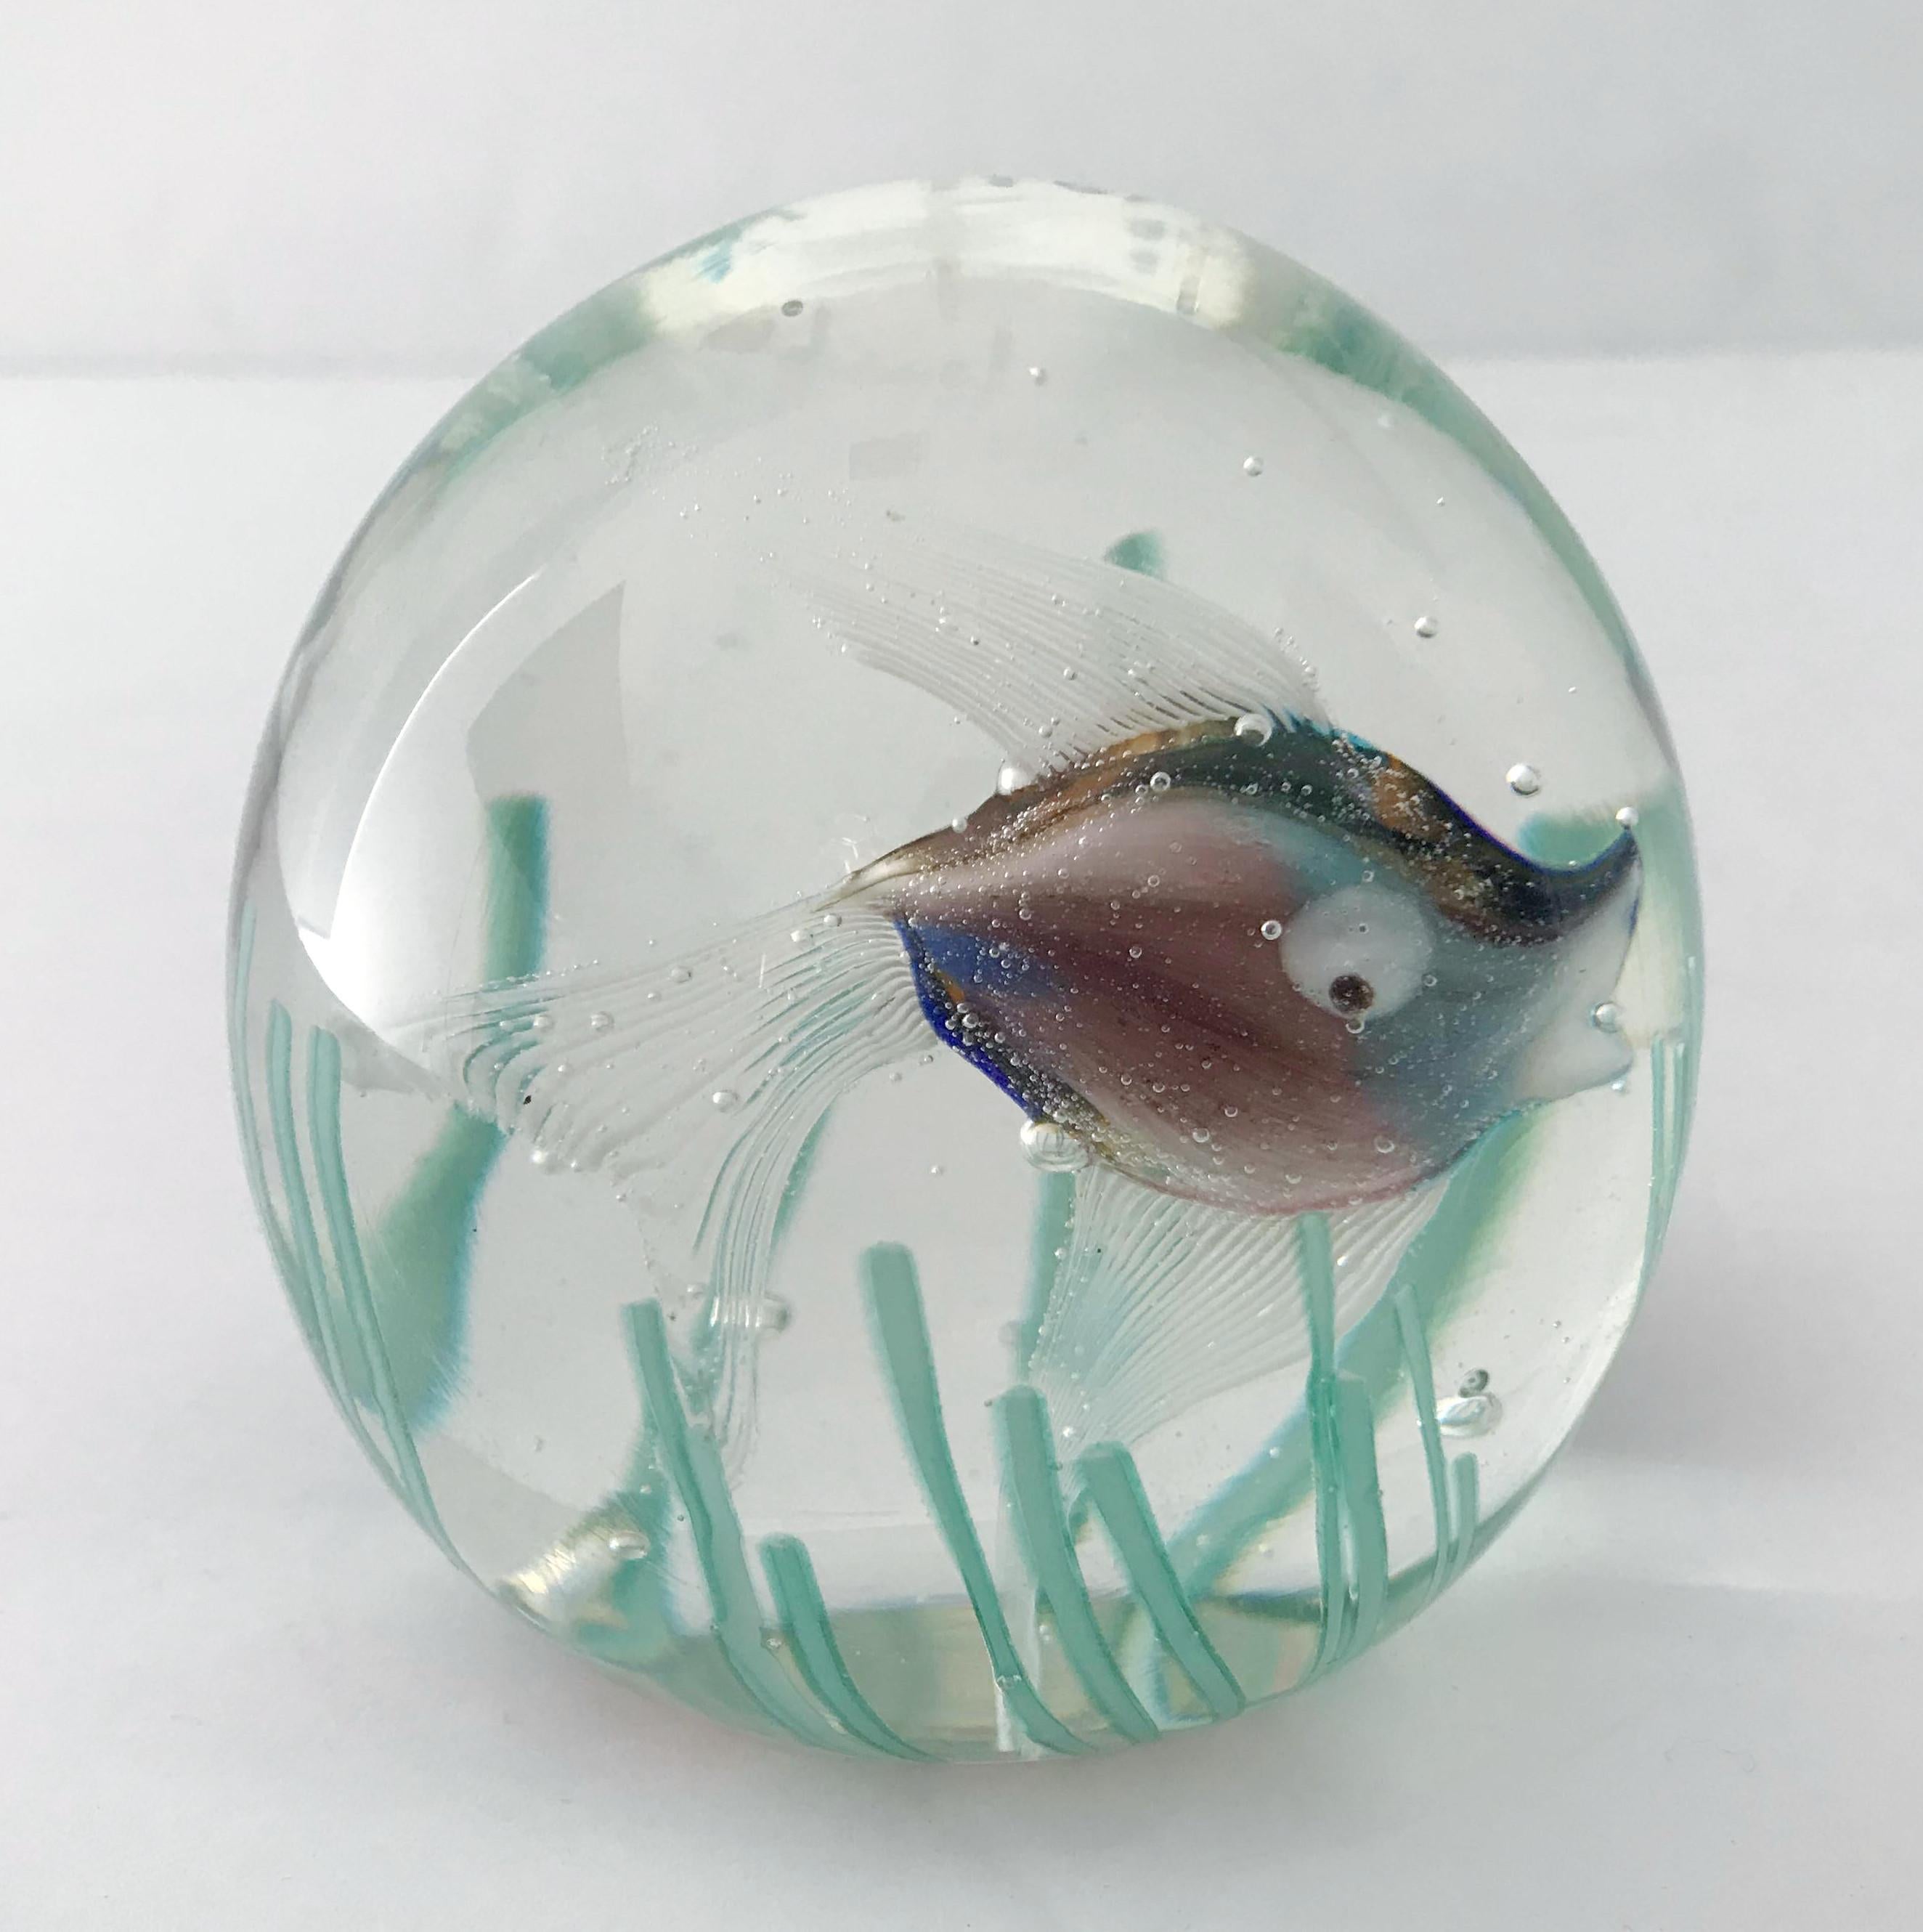 Vintage Italian hand blown Murano glass paperweight exhibiting an aquatic scene with a fish and sea grass / Made in Italy, circa 1960s
Measures: diameter 3 inches / height 3 inches
1 in stock in Los Angeles
Order reference #: FABIOLTD G134
This